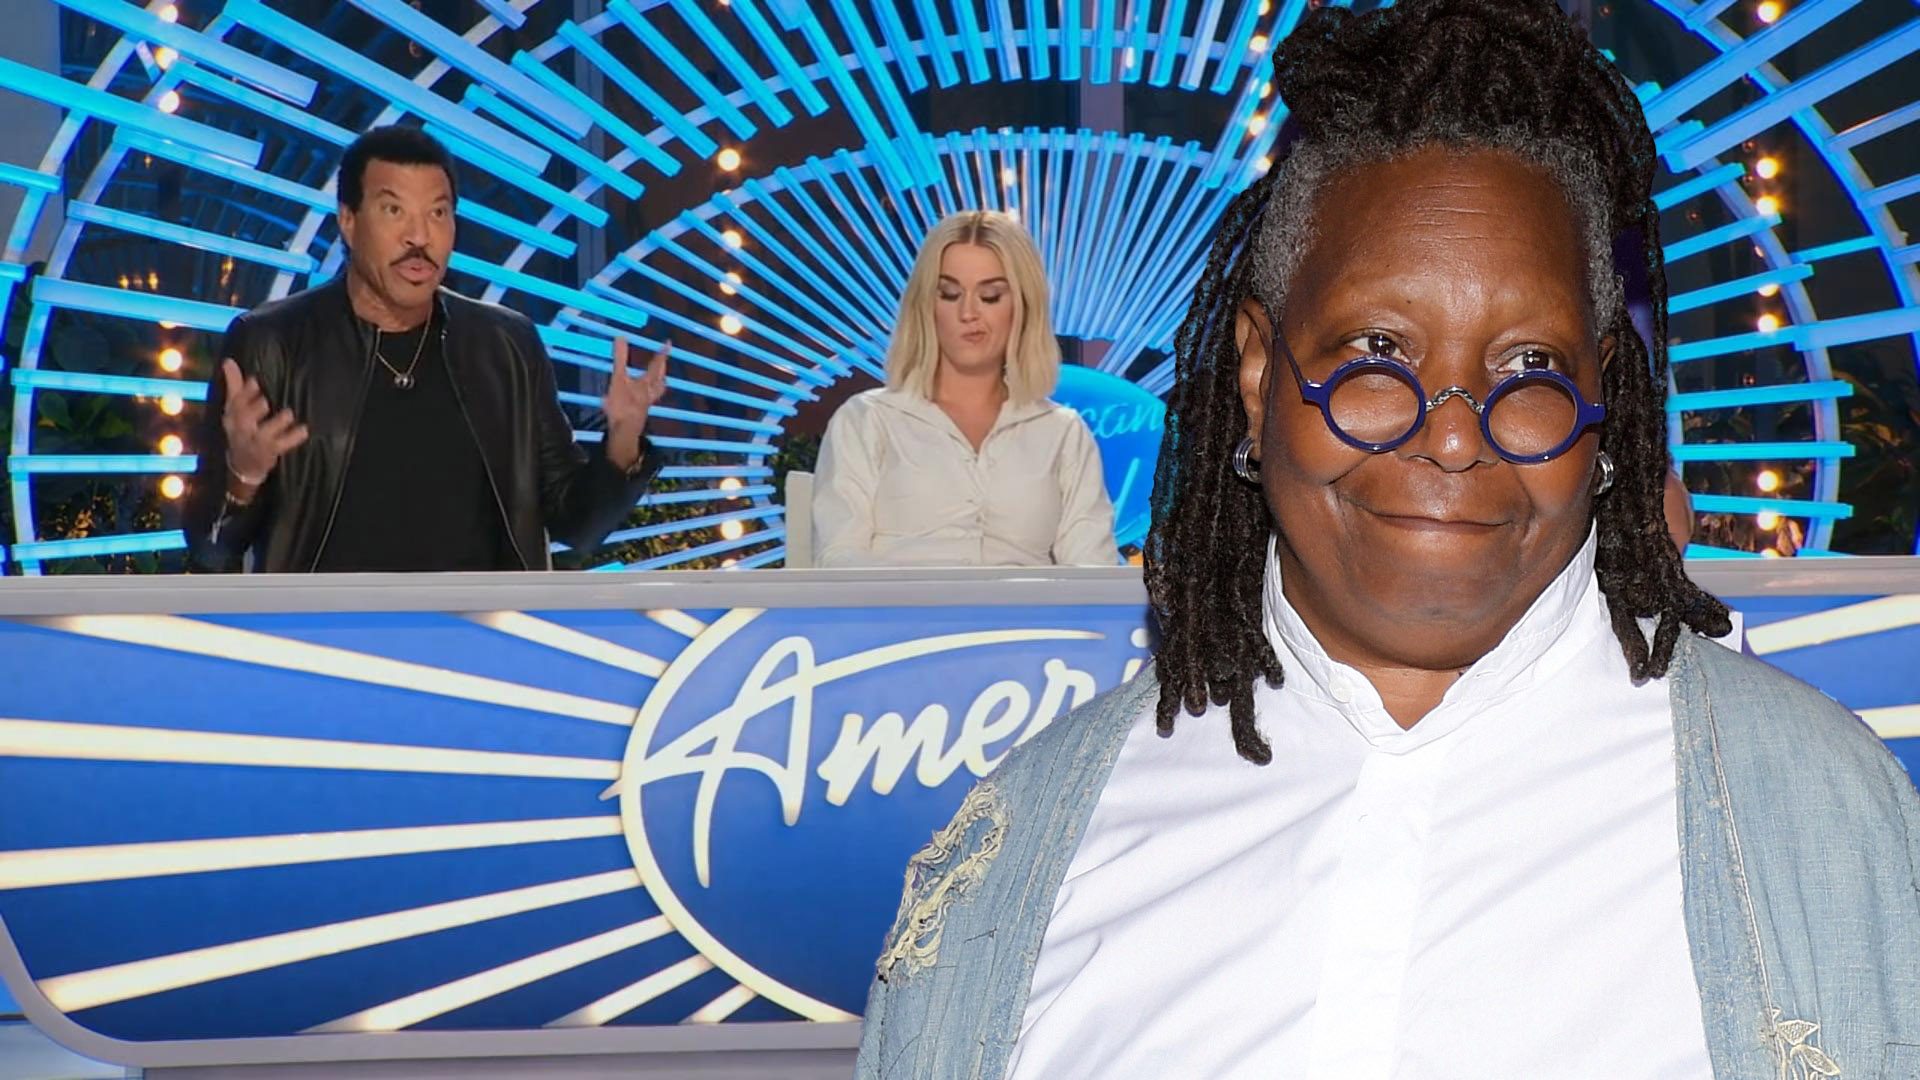 A Surprising Issue Whoopi Goldberg Has with American Idol